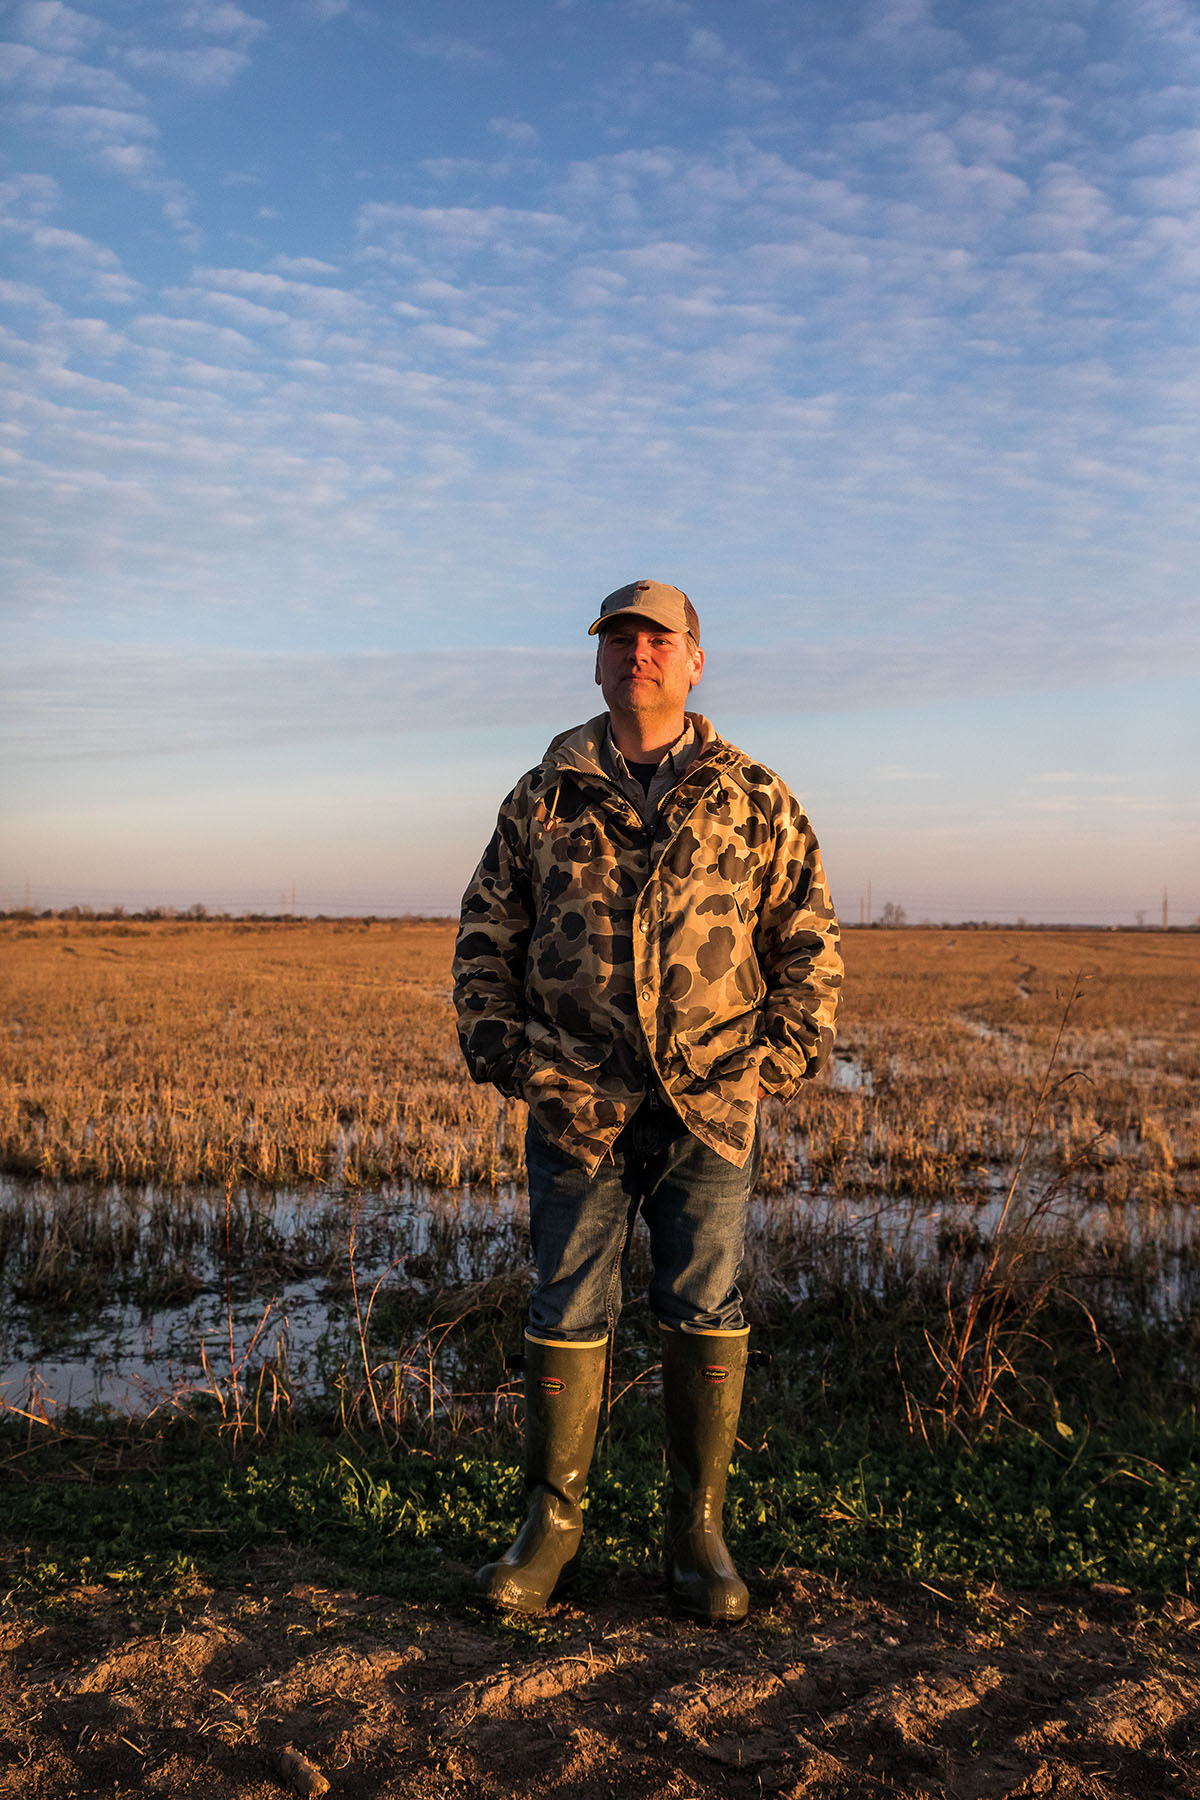 A man in a camoflague jacket and boots stands with his hands in his pockets in a bayou